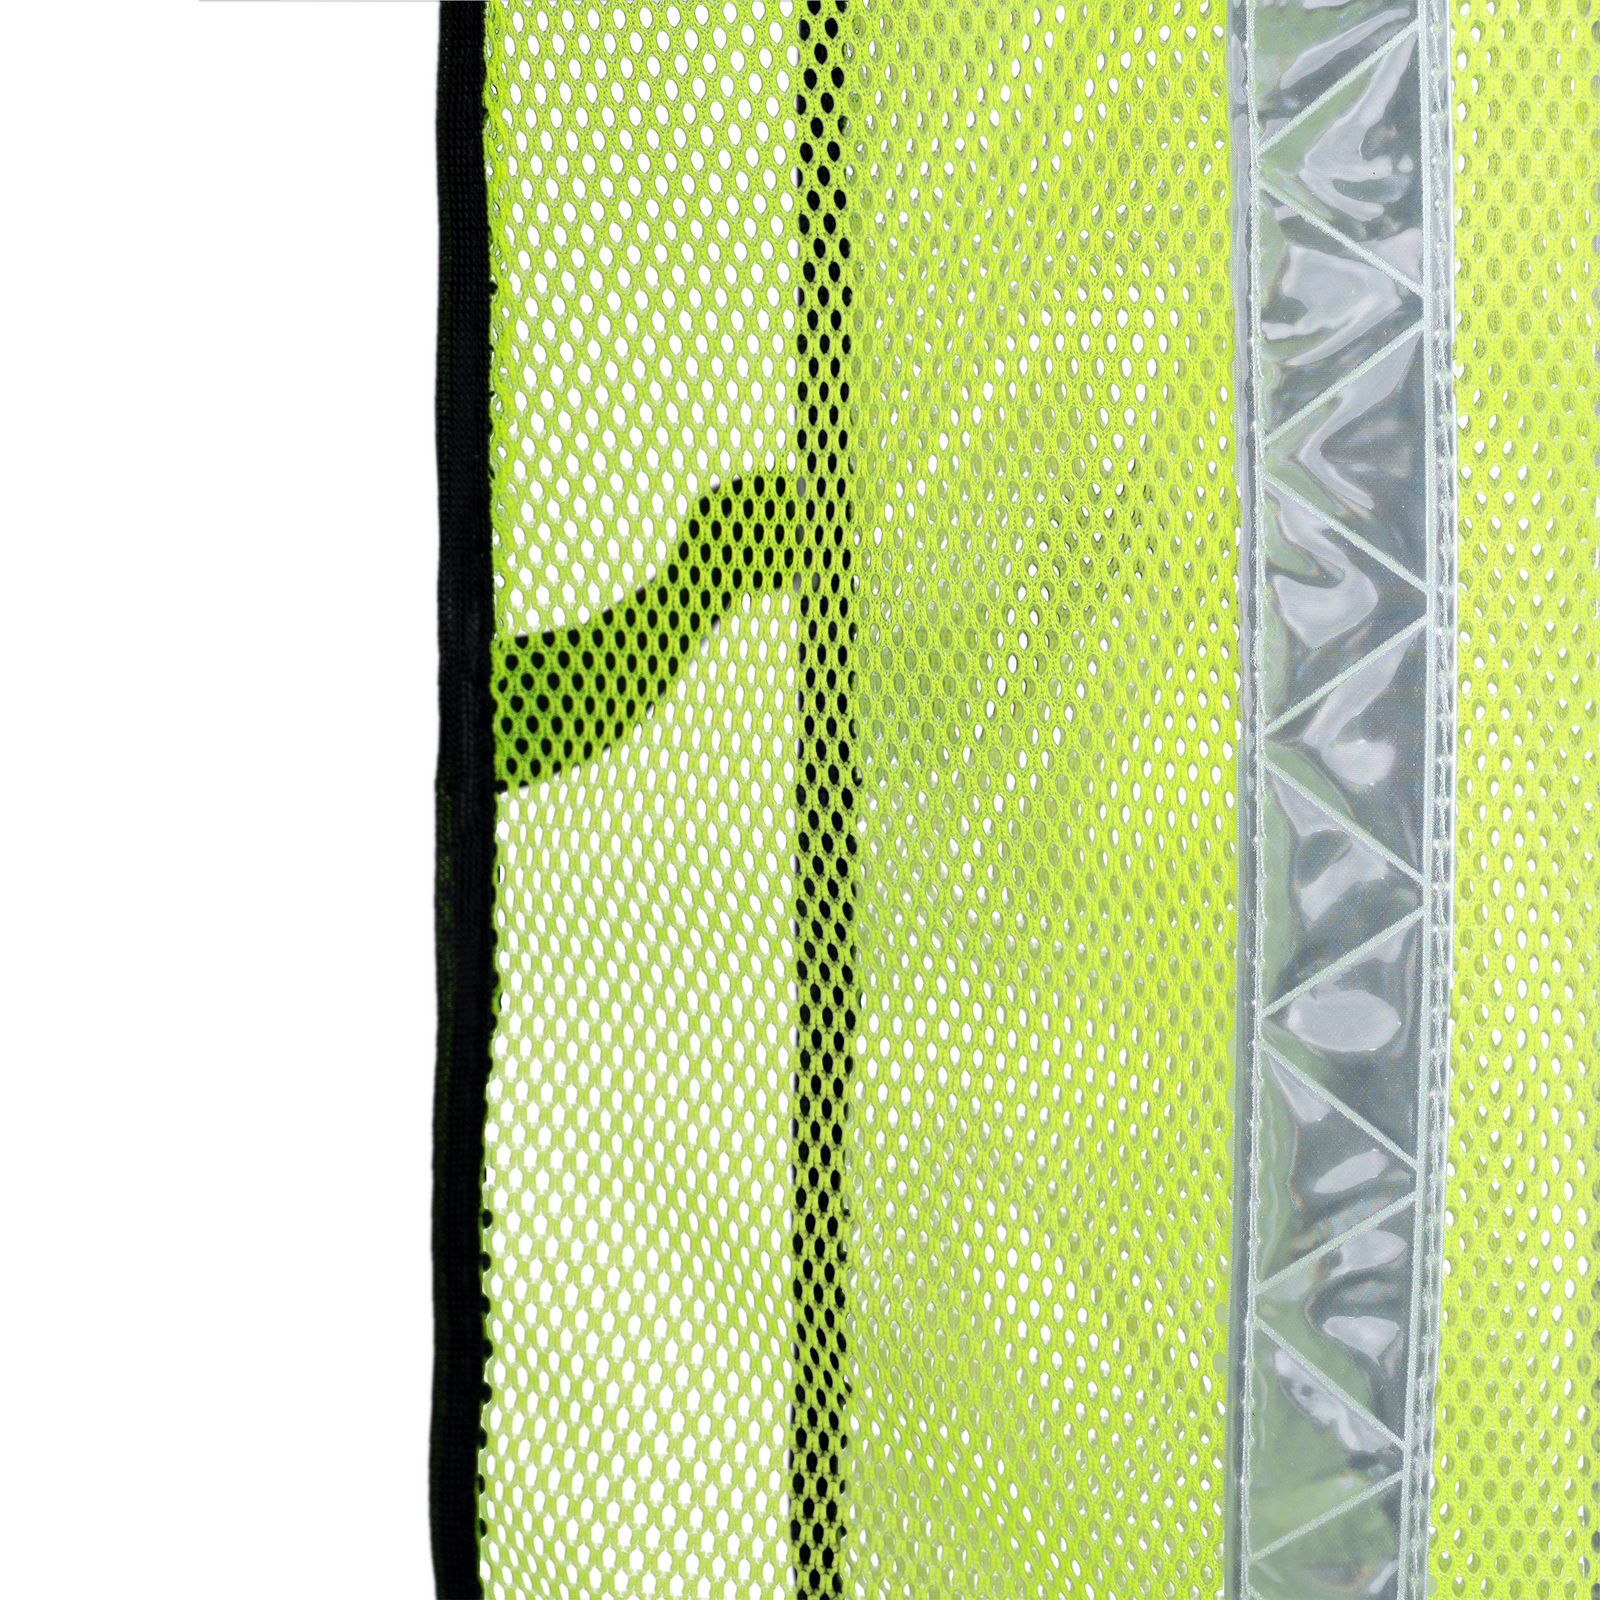 Close up showing the hi visibility yellow mesh and the reflective stripe on the safety vest